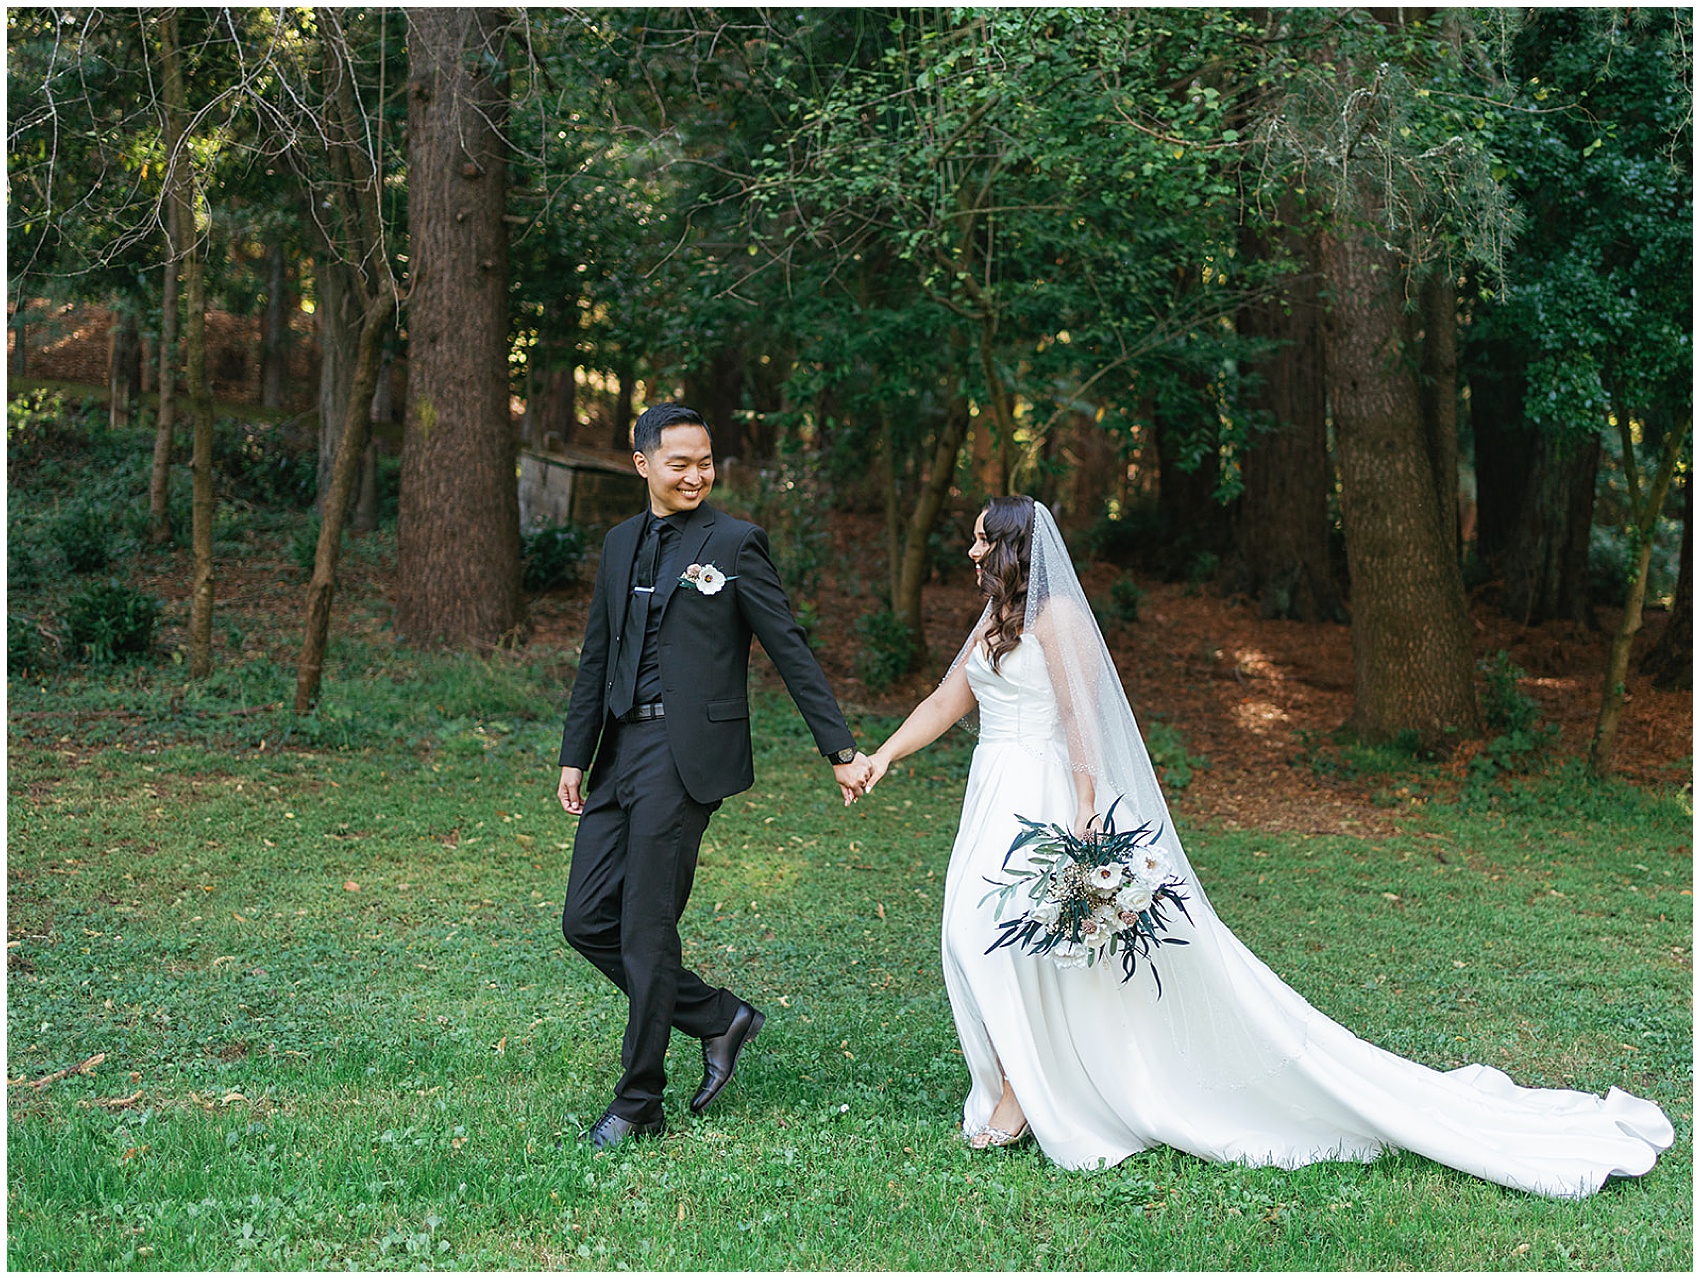 A groom in a full black suit leads his bride by the hand through a forest lawn